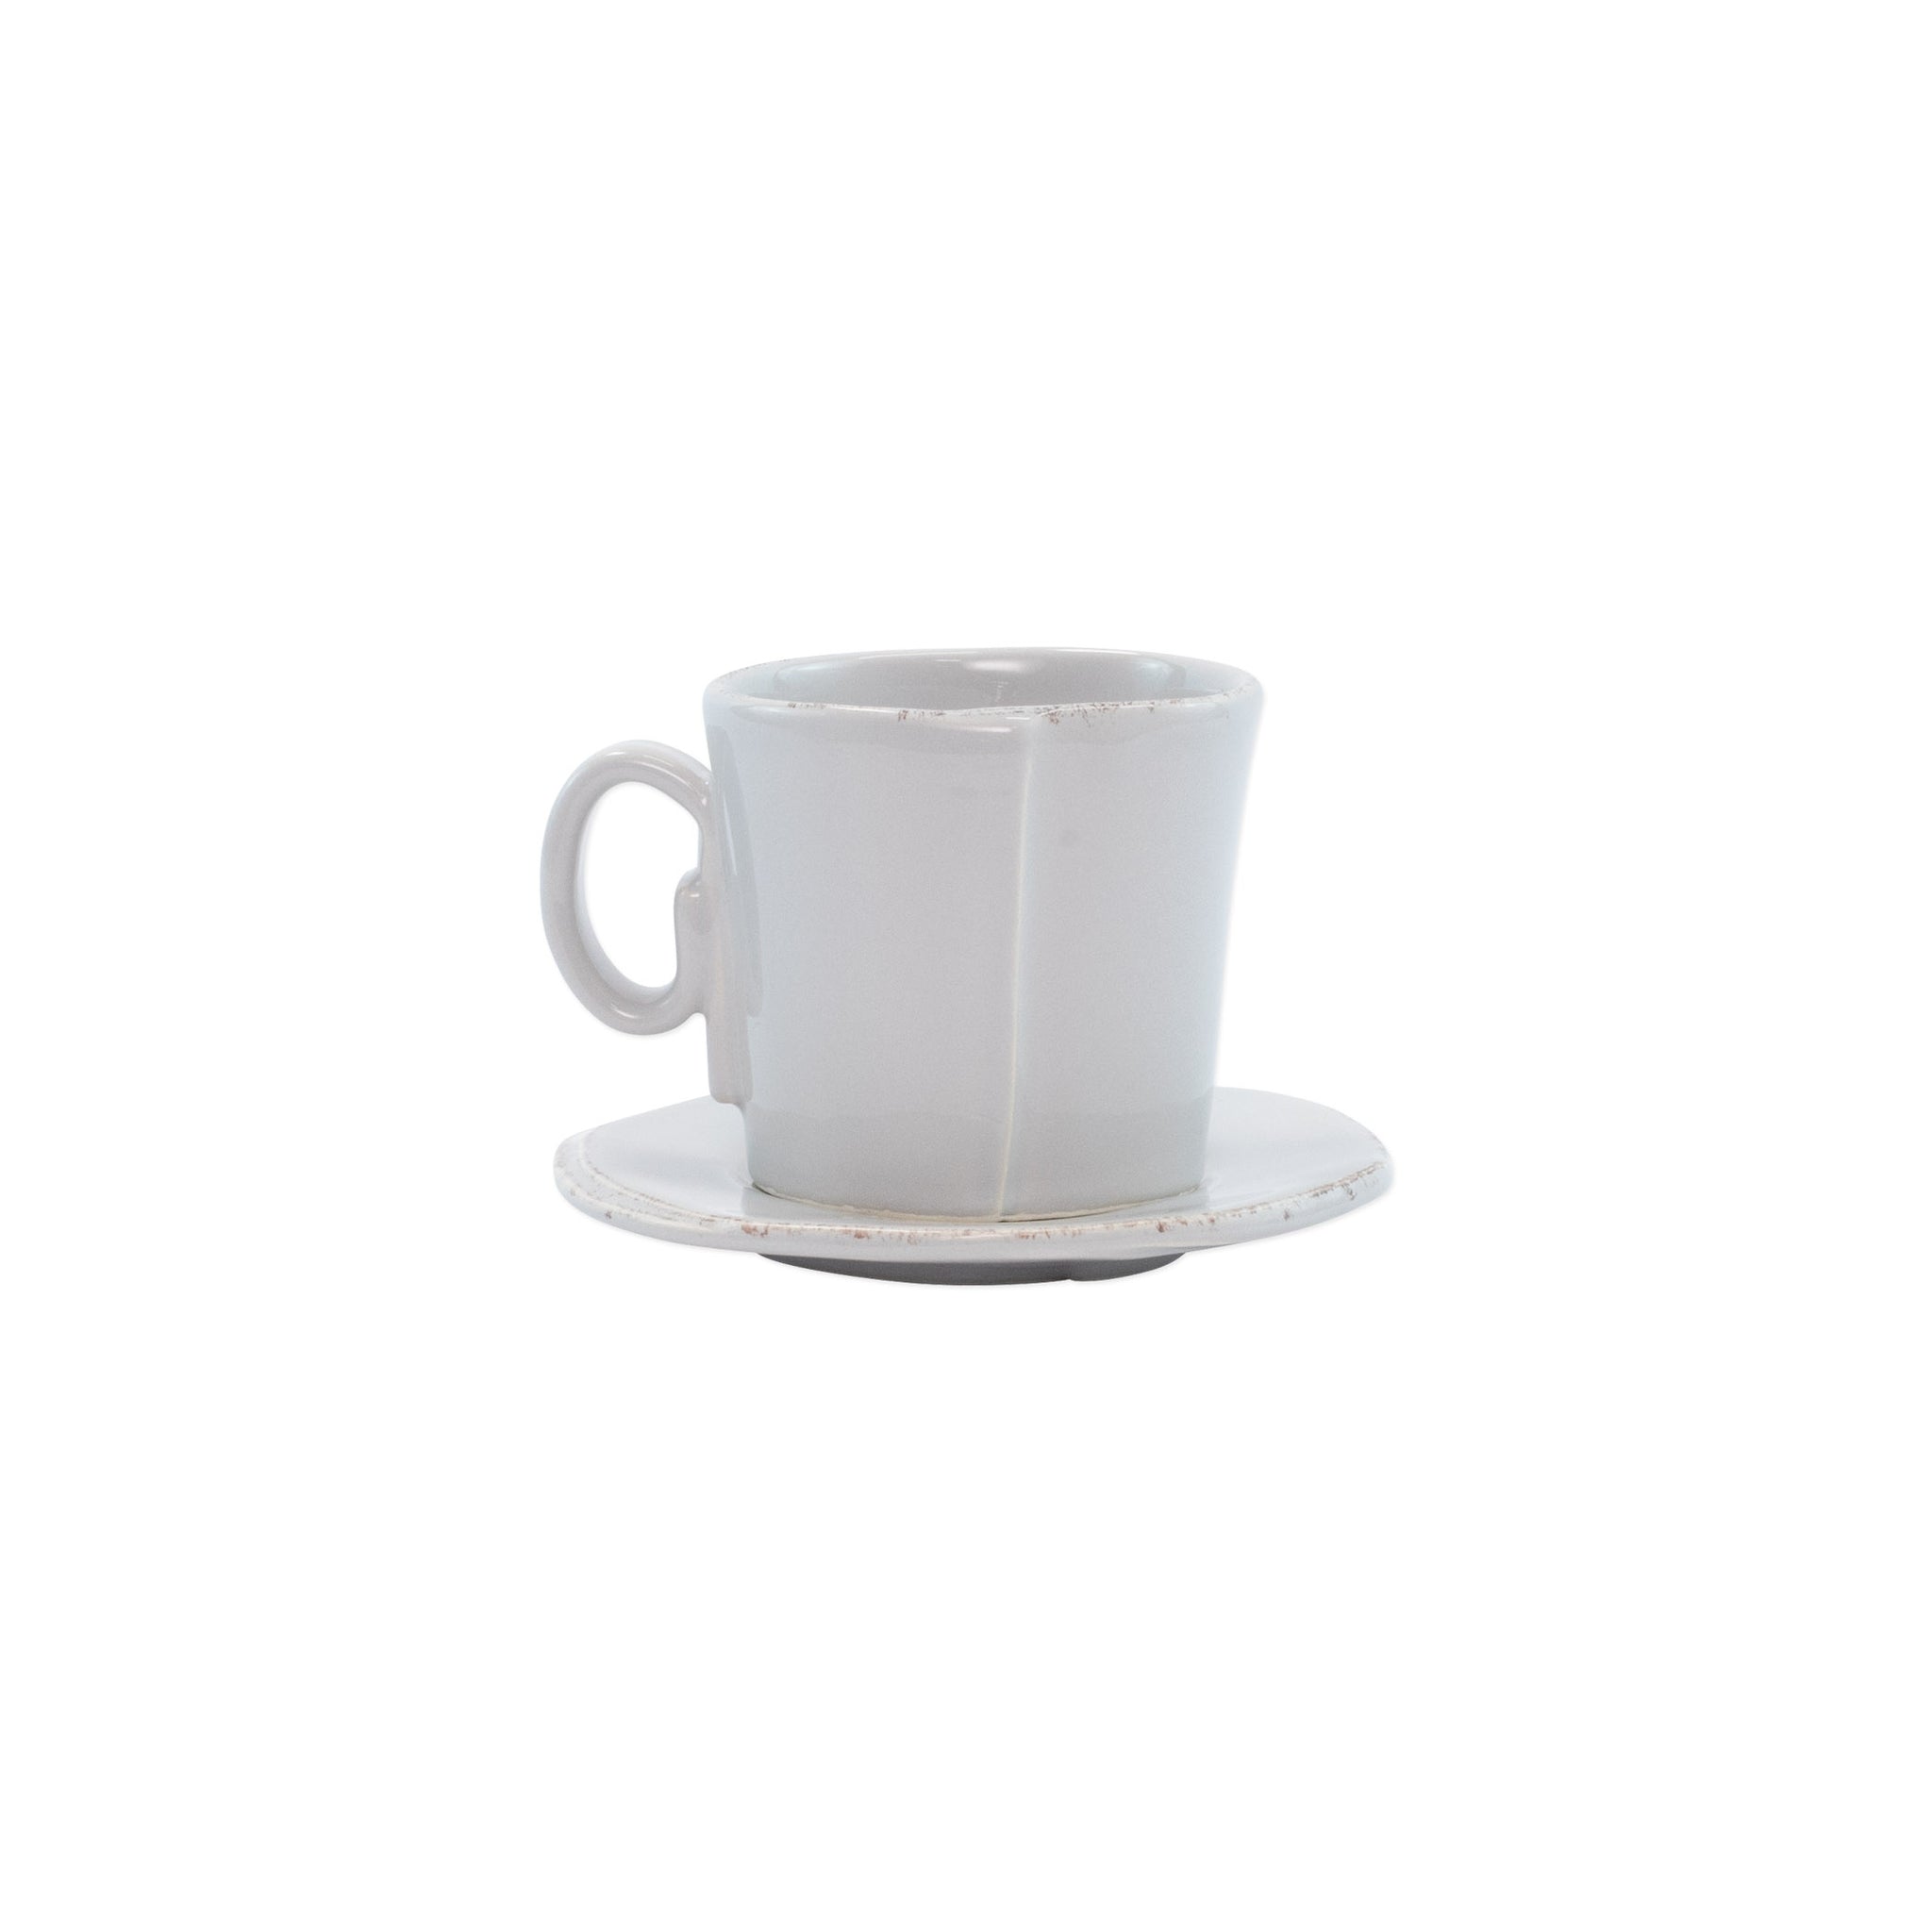 Lastra Espresso Cup and Saucer - Set of 4 - Light Gray